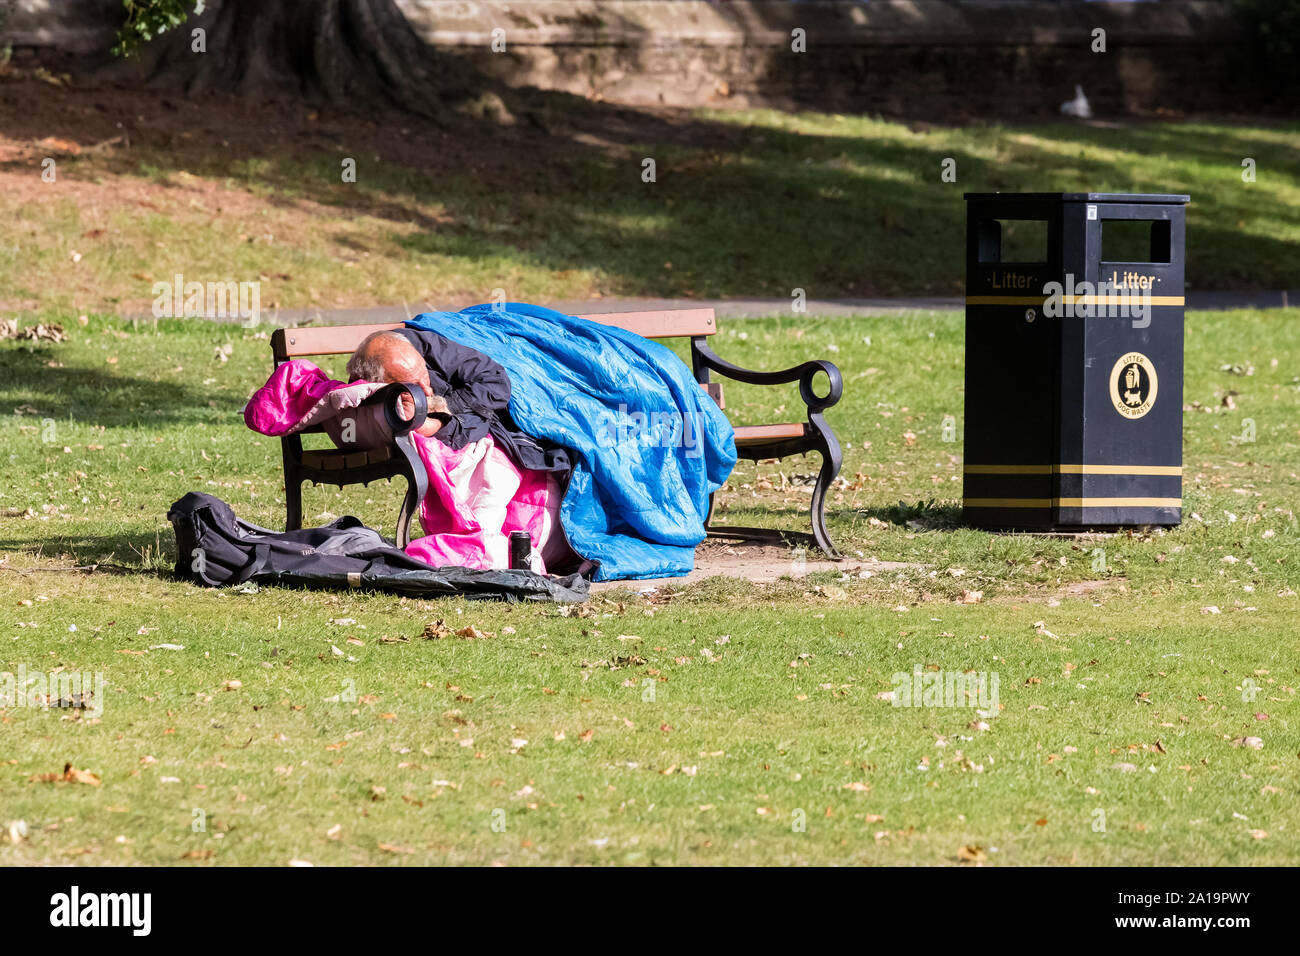 Homeless man asleep in his sleeping bag on a park bench in the park Stock Photo